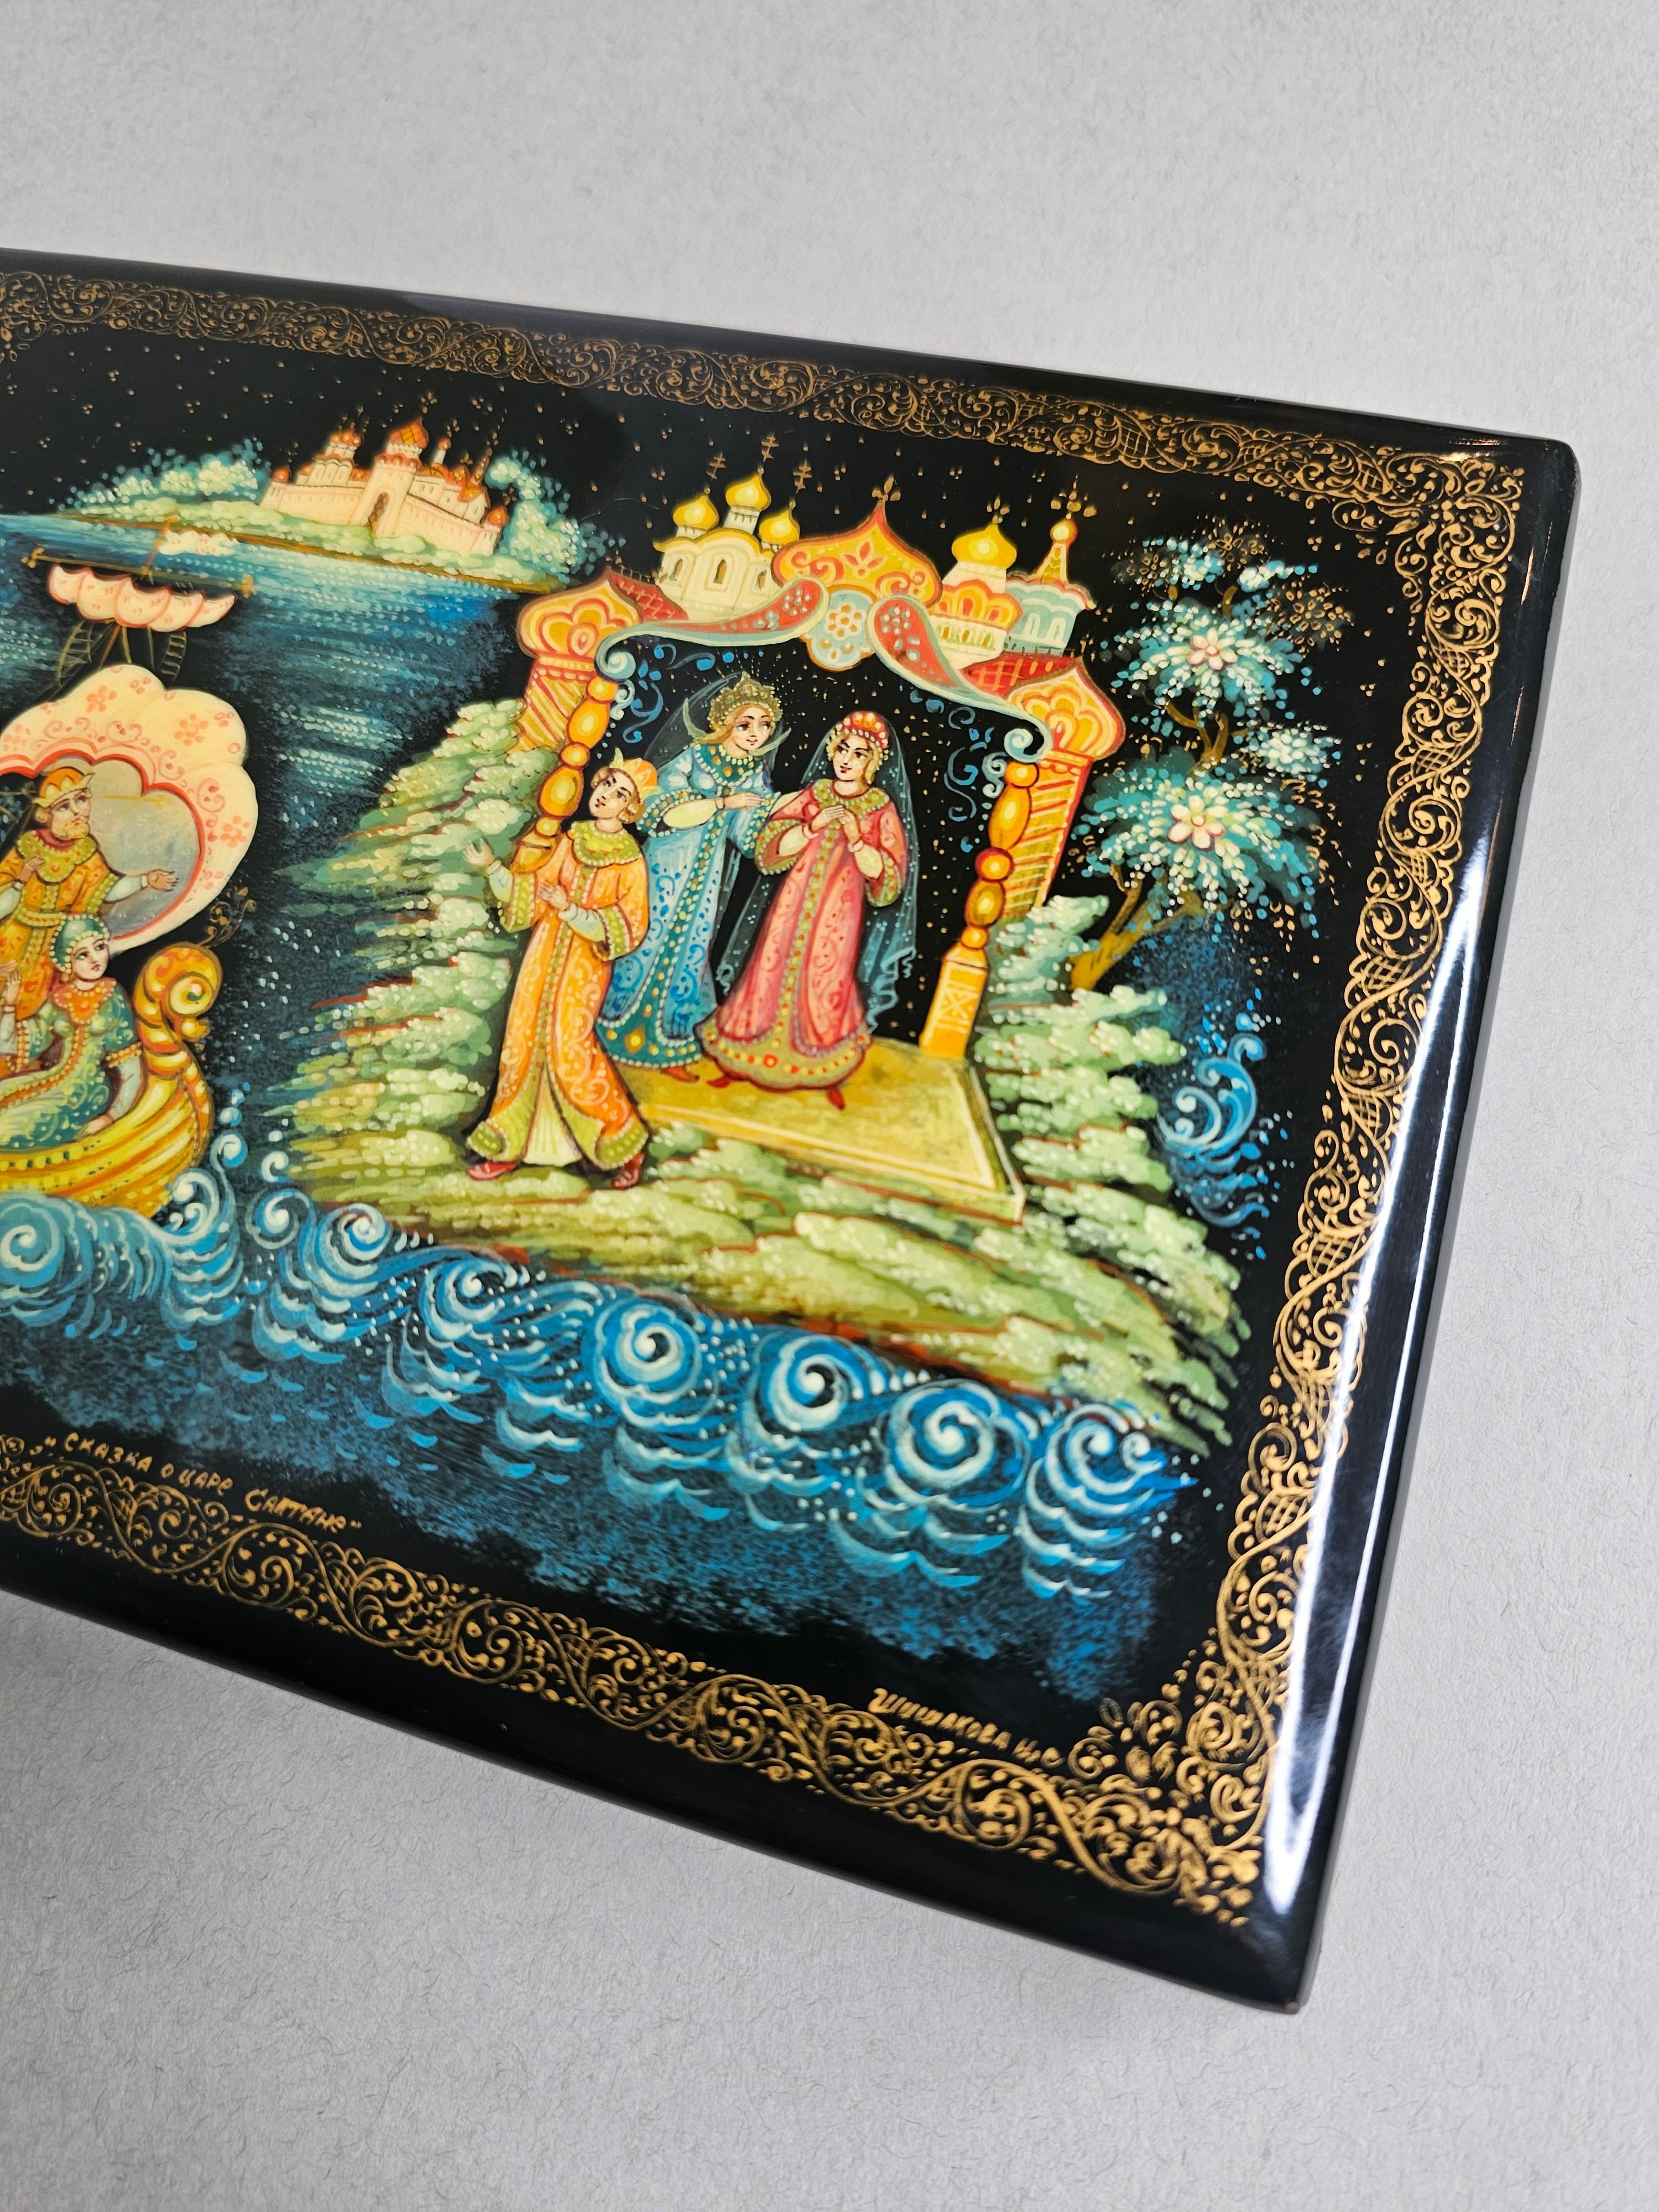 A rare and exceptional finely painted vintage Imperial Russian lacquerware box. 

Exquisitely hand-crafted in the Palekhsky District (Палех) of western Russia, the stunning Palekh miniature features black lacquered papier-mâché construction,